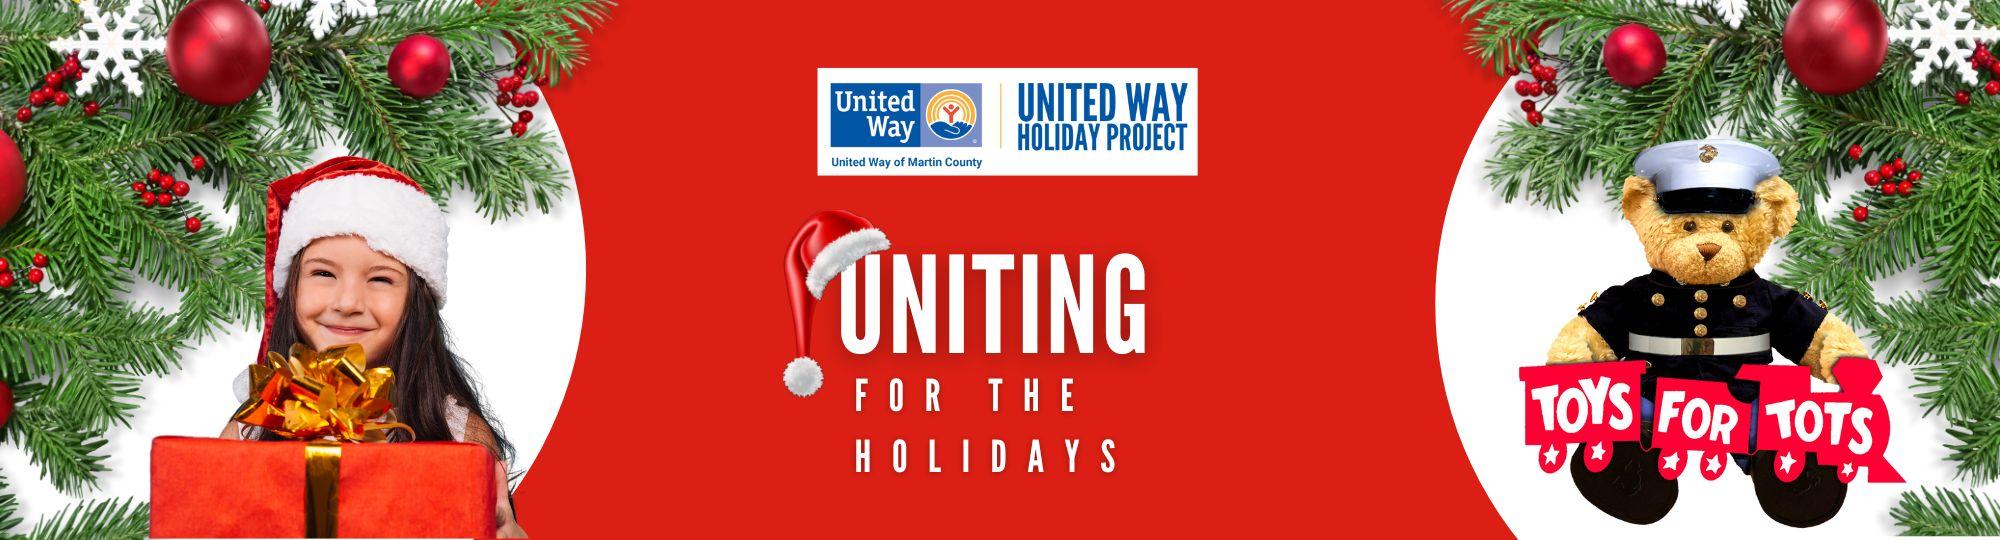 United Way Holiday Project